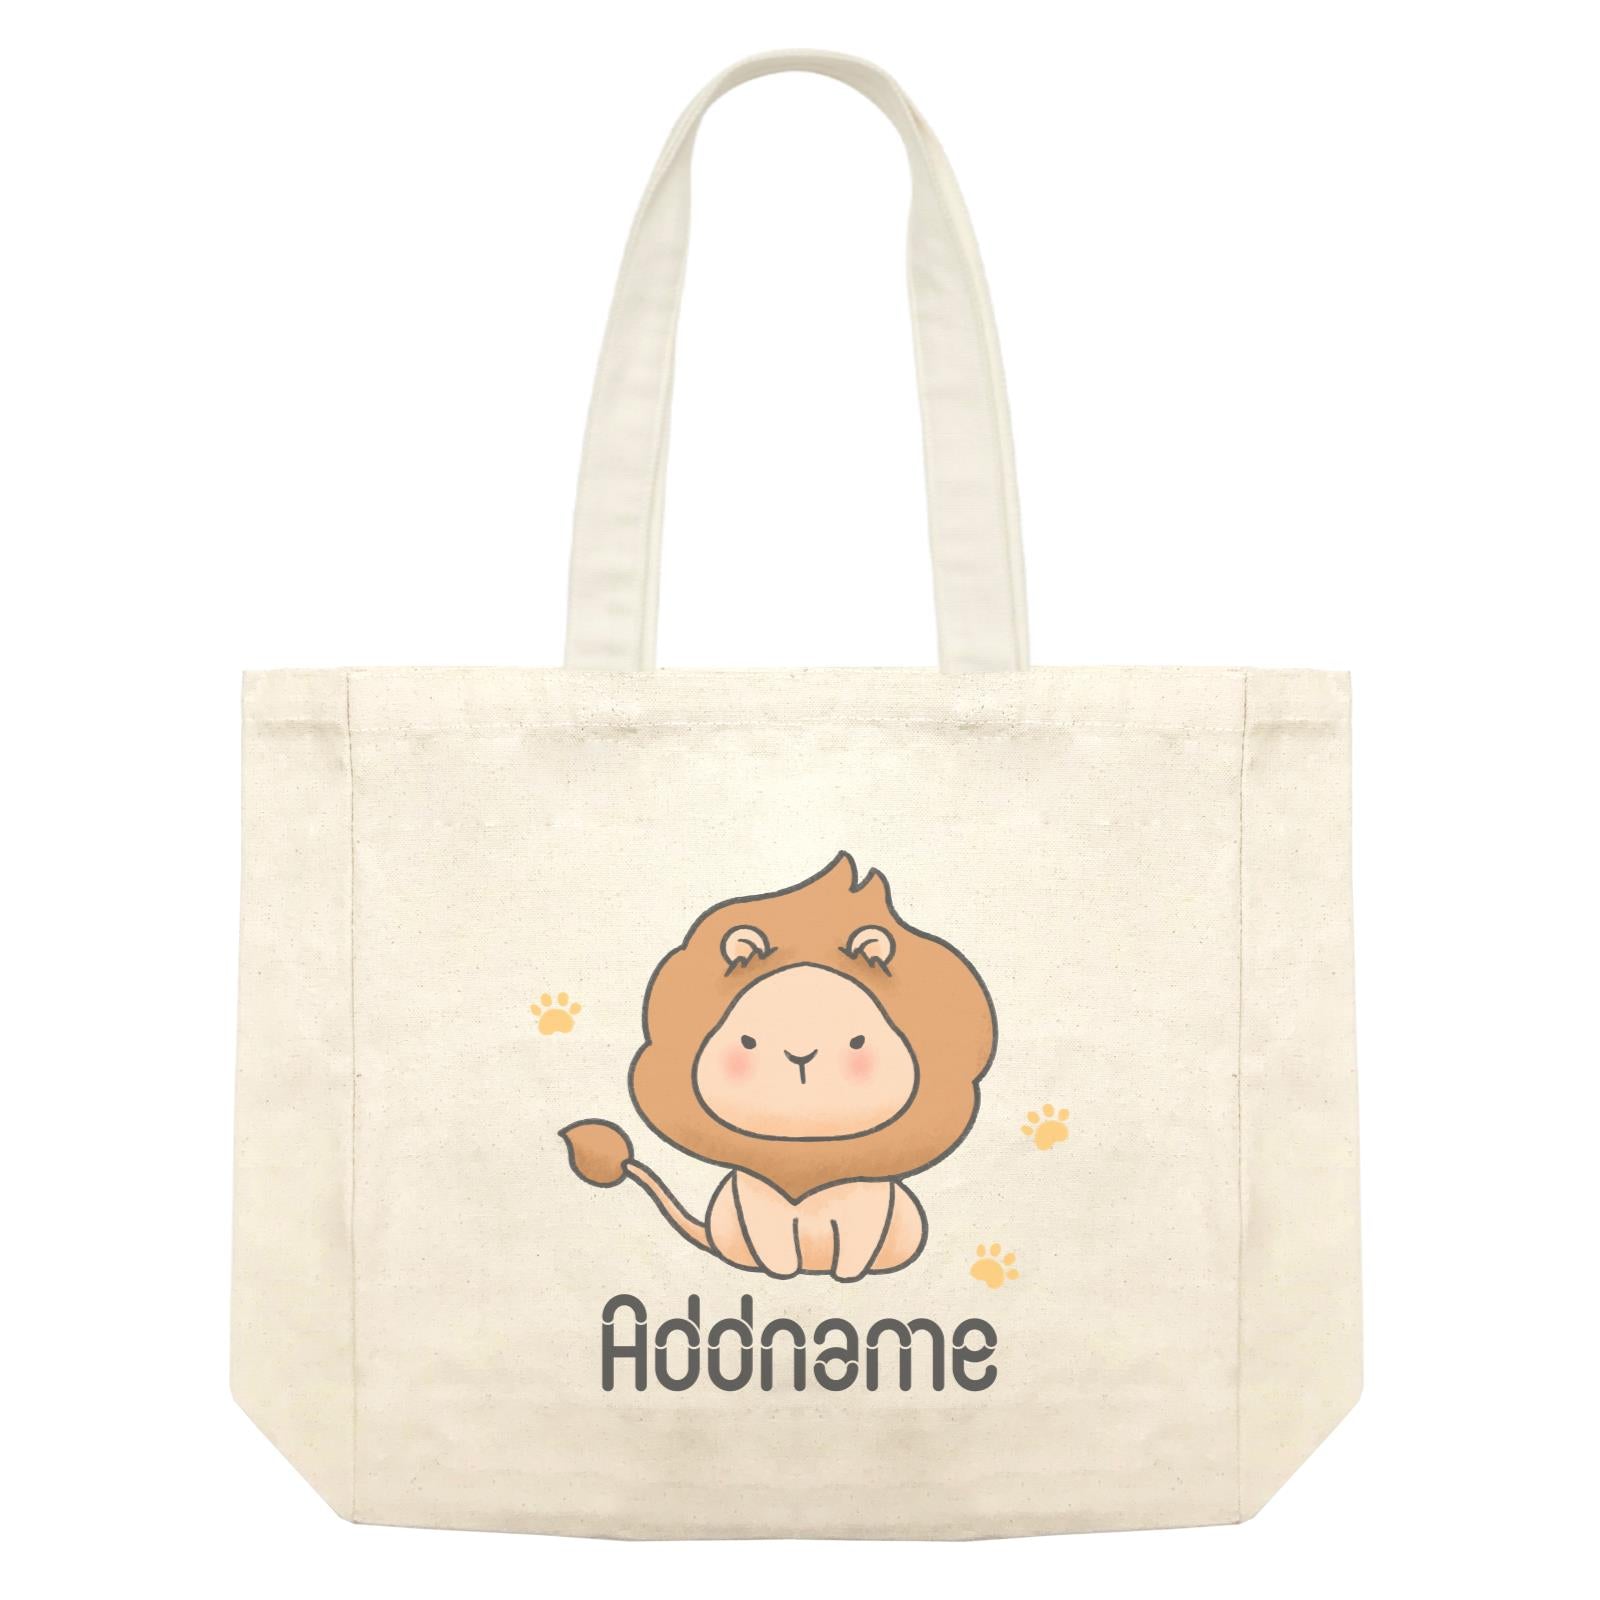 Cute Hand Drawn Style Lion Addname Shopping Bag